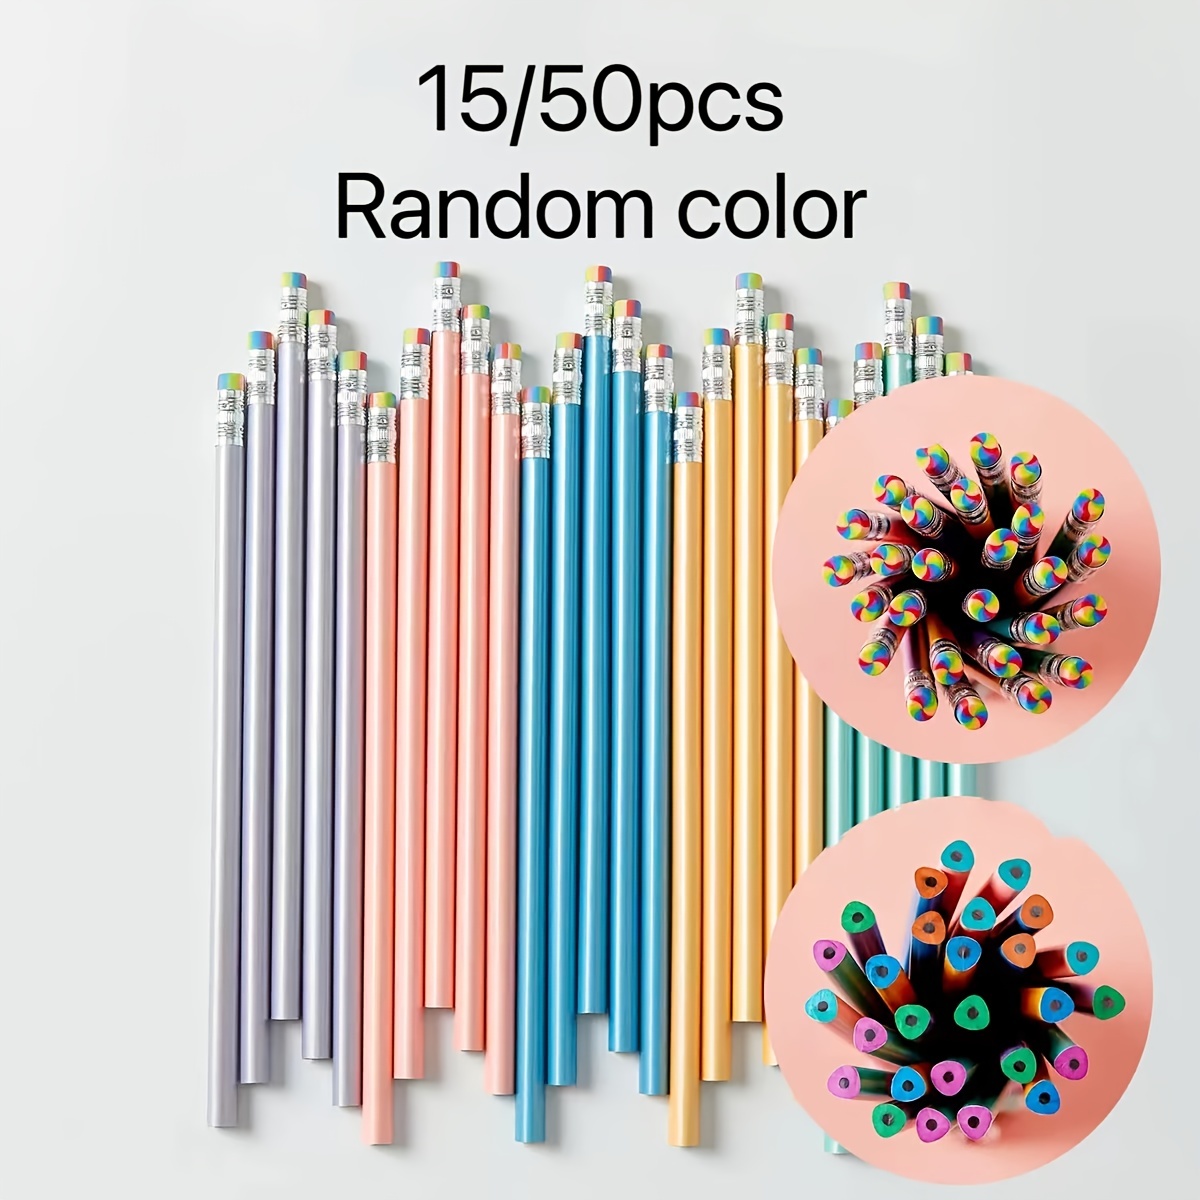 OJYUDD Flexible Bendy Pencil 35 Pcs Flexible Soft Pencil Colorful Stripe Soft Pencils with Eraser As Gift for Students or Children